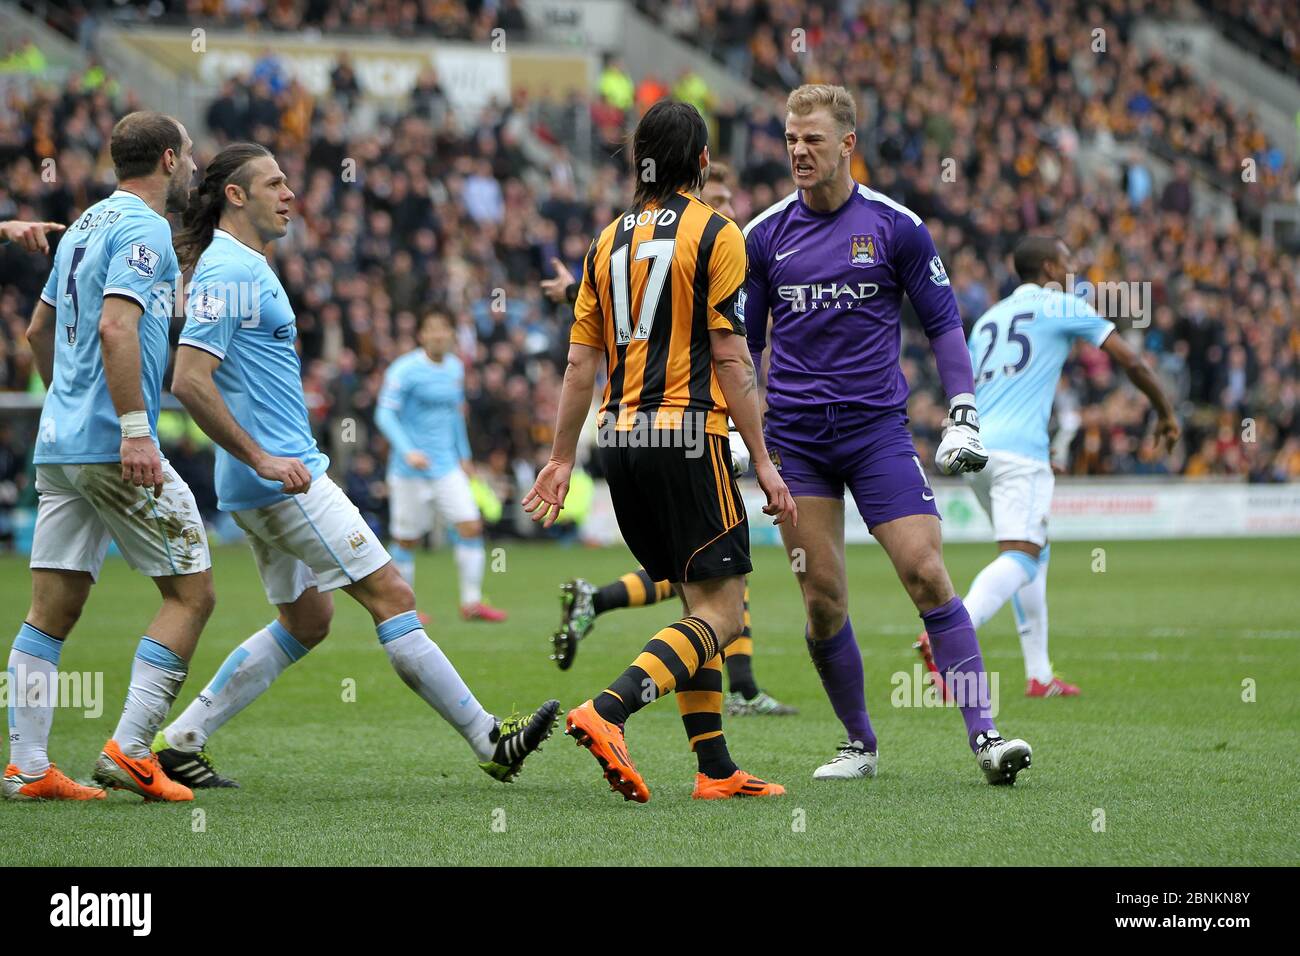 KINGSTON UPON HULL, ENGLAND - Manchester City's Joe Hart reacts after George Boyd of Hull City goes down in the penalty area after his challenge during the Premier League match between Hull City and Manchester City at the KC Stadium, Kingston upon Hull on Saturday 15th March 2014 (Credit: Mark Fletcher | MI News) Stock Photo